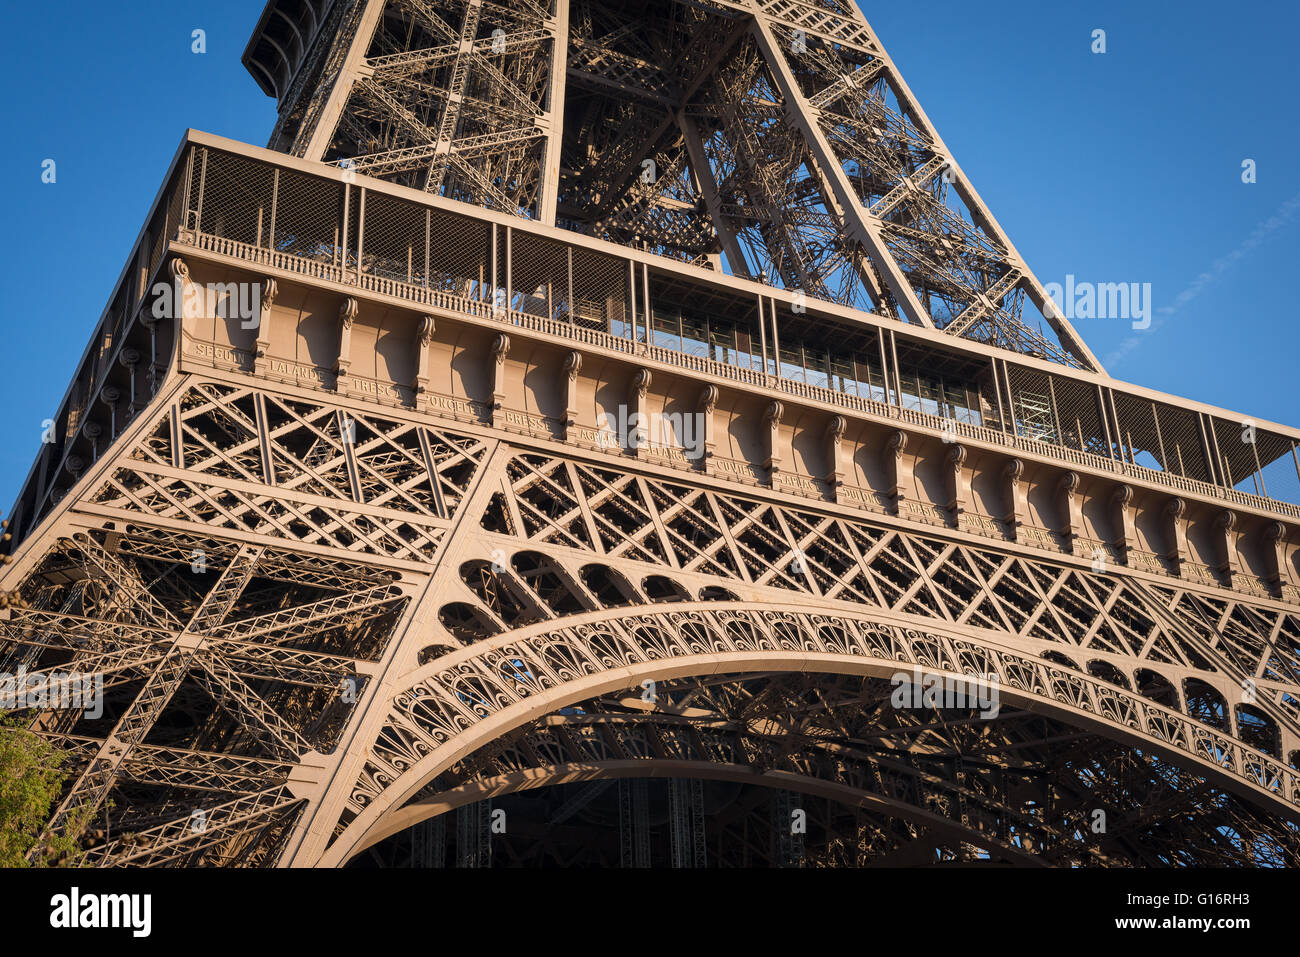 Close up view of the first level of the Eiffel Tower in Paris, France Stock Photo